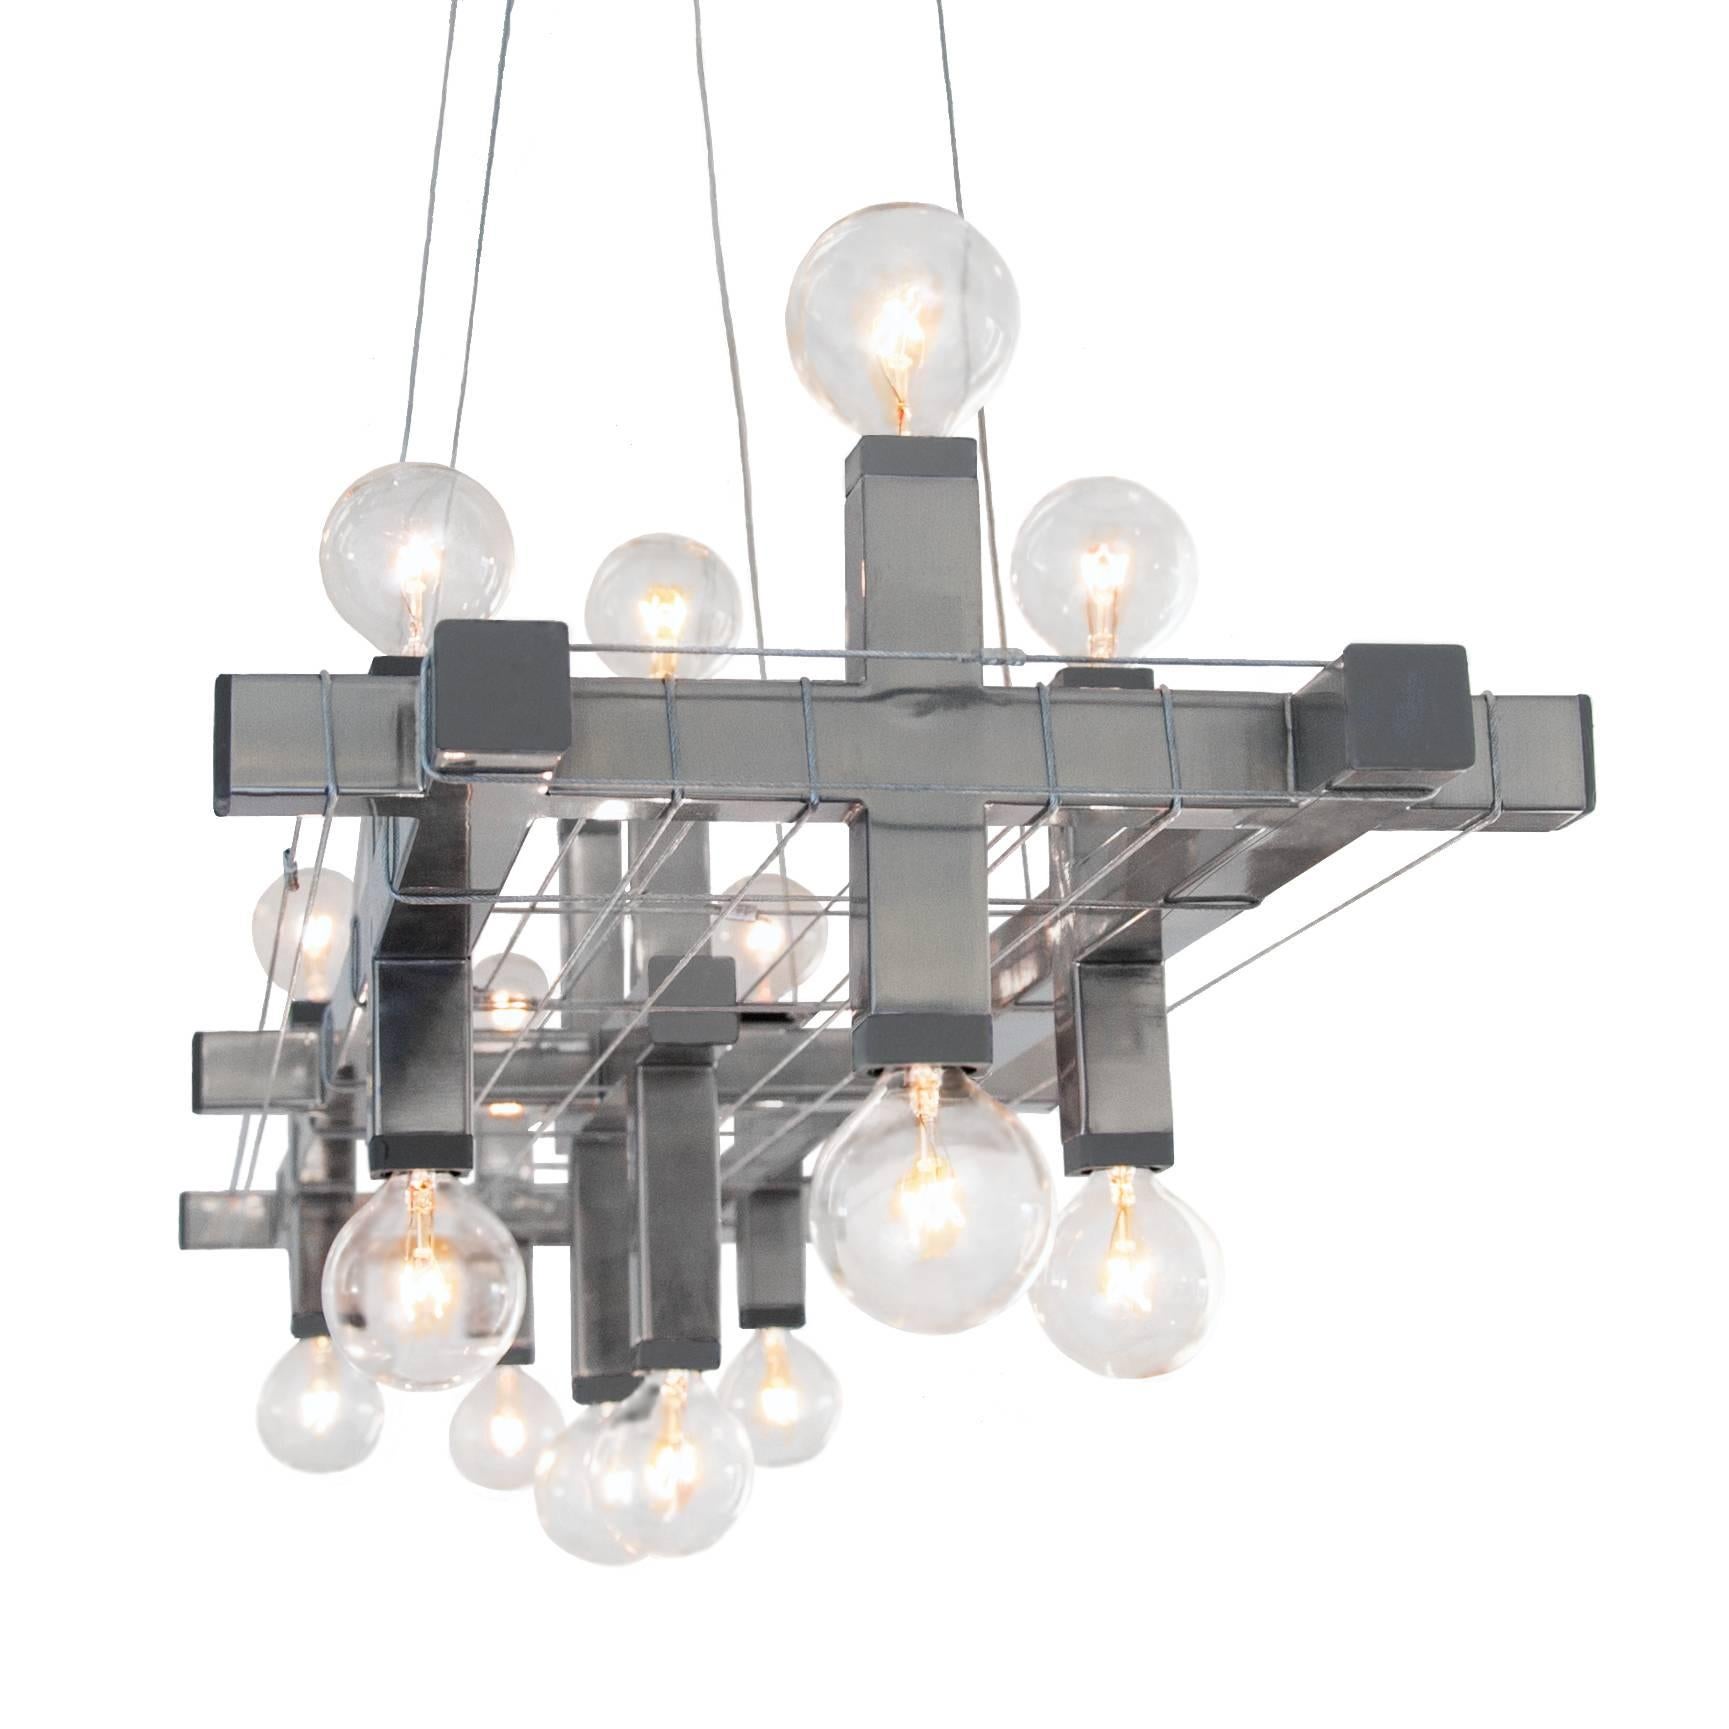 The Matrix Linear suspension is a light that can change. Featuring eight up-lights and eight down-lights, it is a beautiful modern lighting fixture. It is designed in such a way to be able to carry a wide array of different decorative elements which